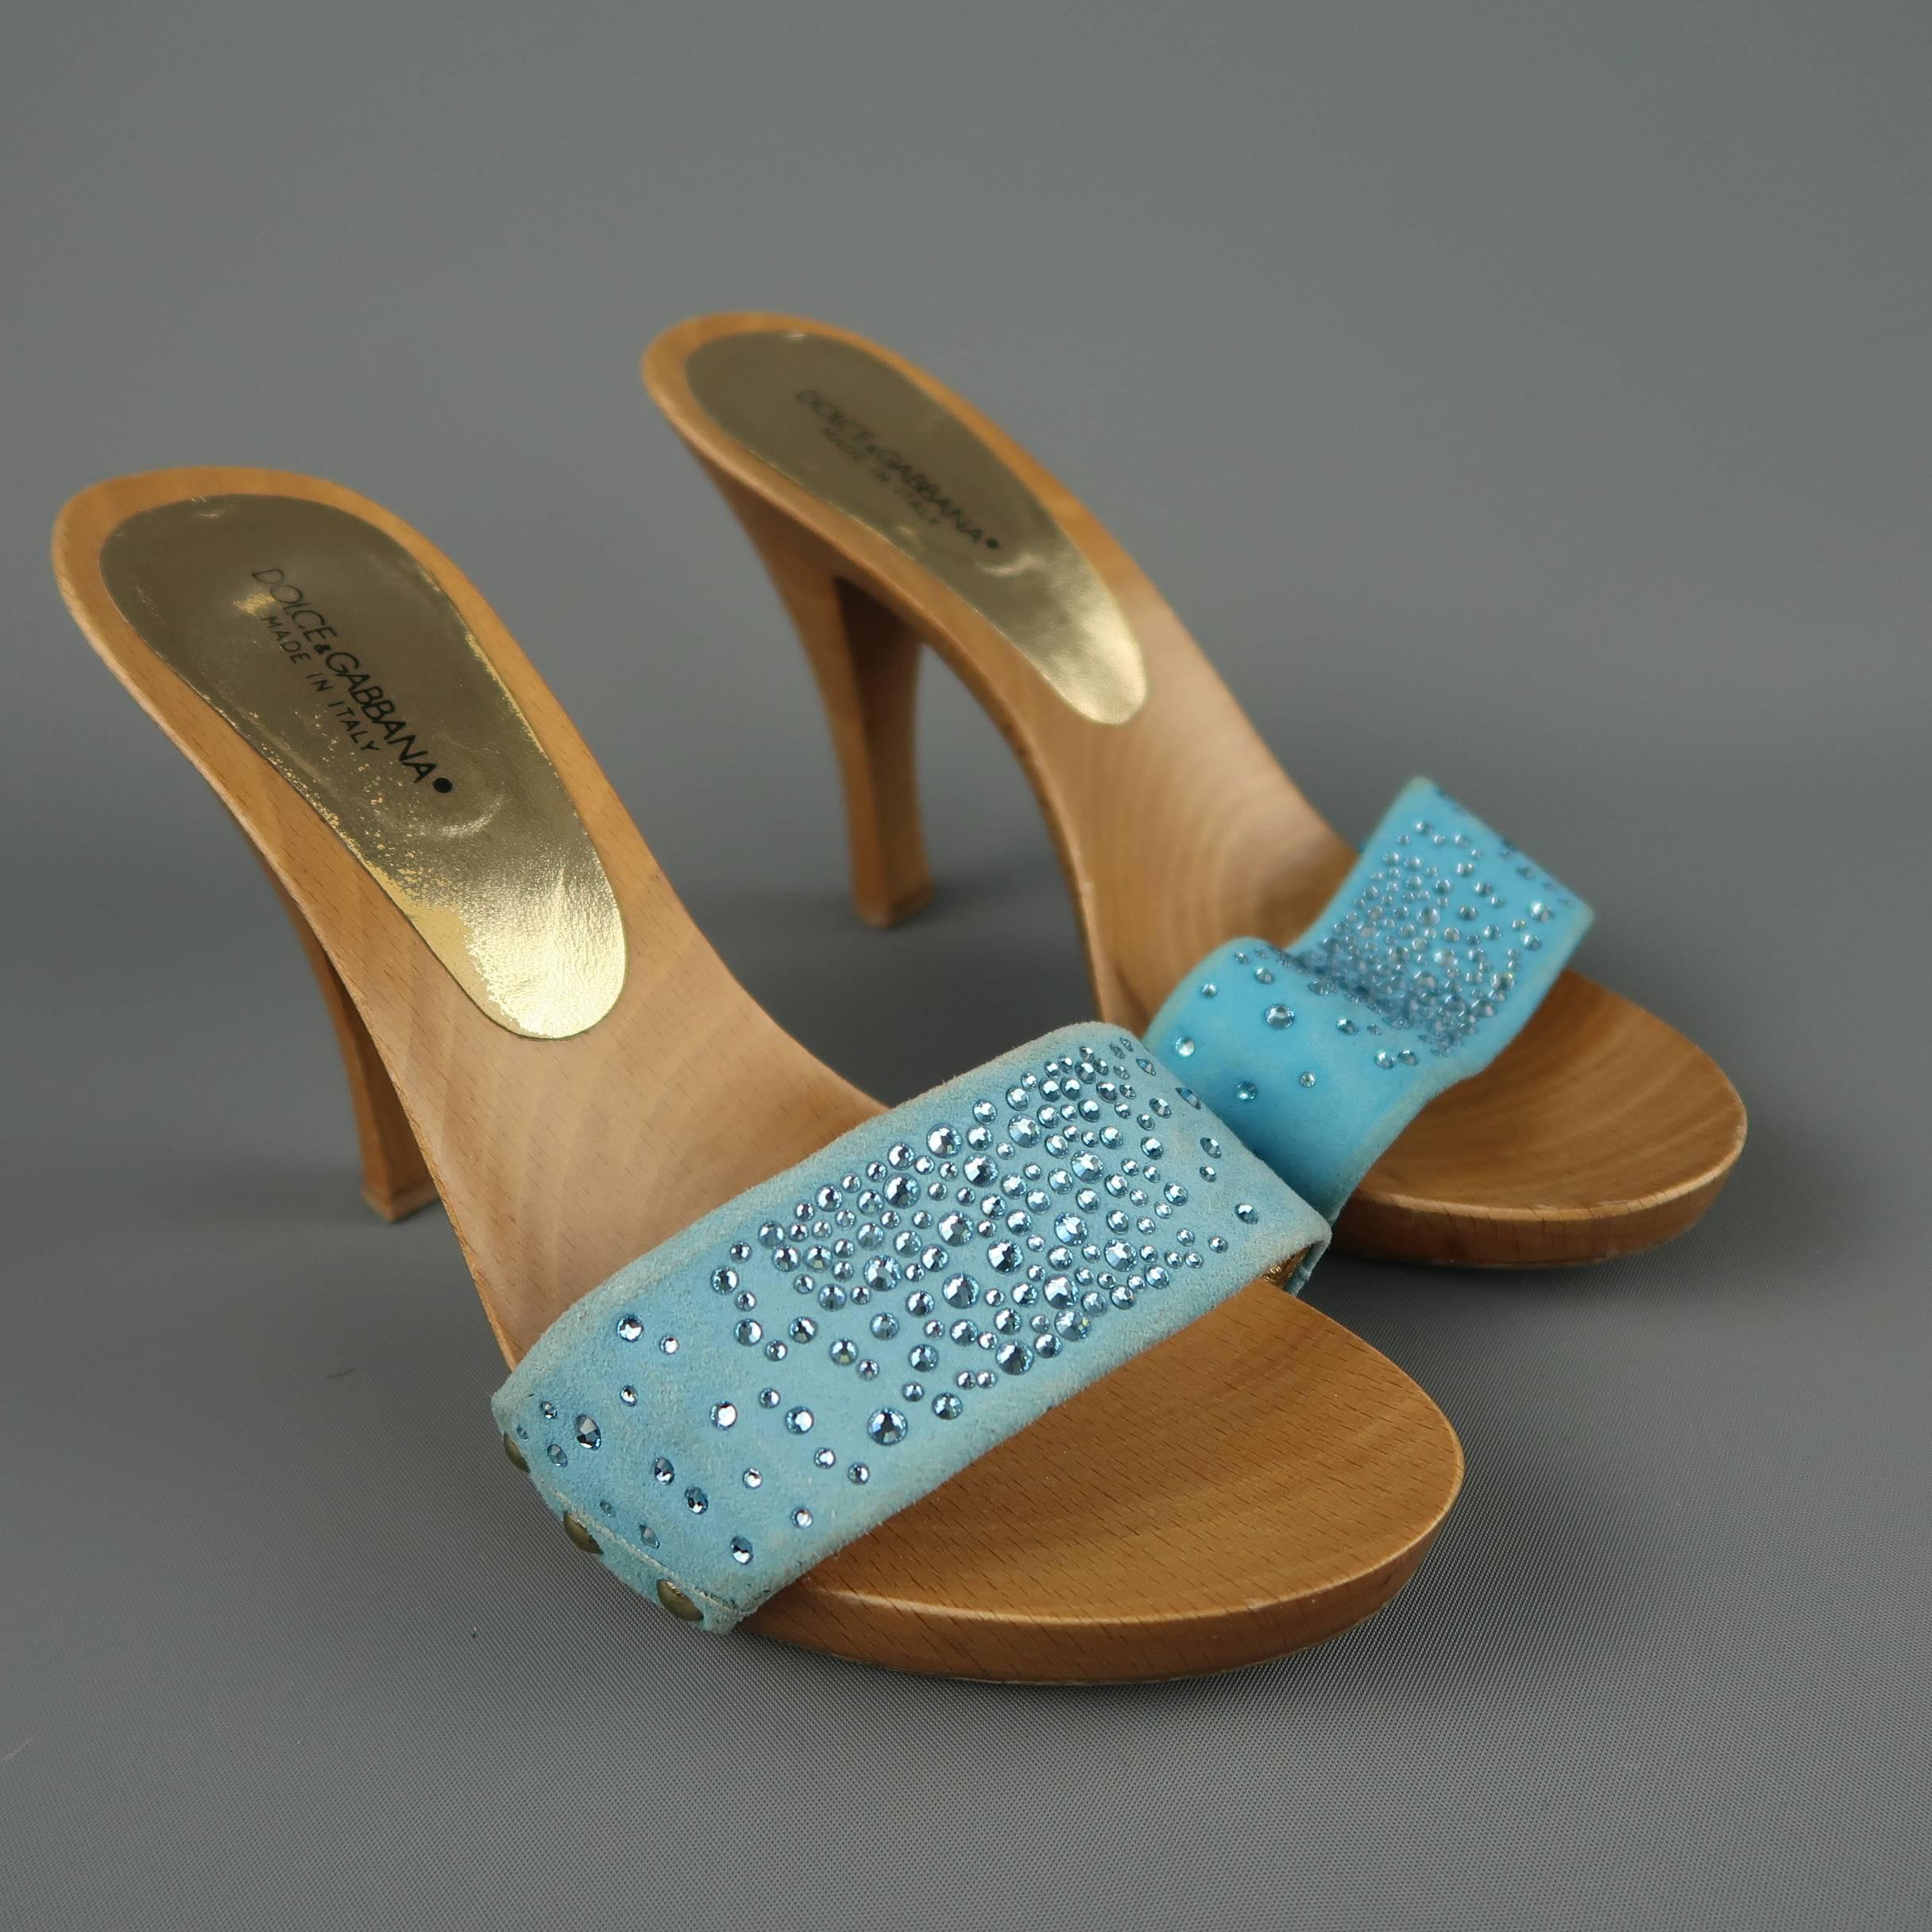 DOLCE & GABBANA mule sandals feature a thick blue suede toe strap with rhinestones and a wooden platform heeled sole. Wear throughout.  Made in Italy.
 
Fair Pre-Owned Condition.
Marked: IT 37
 
Heel: 4.25 in.
Platform: 0.25 in.
